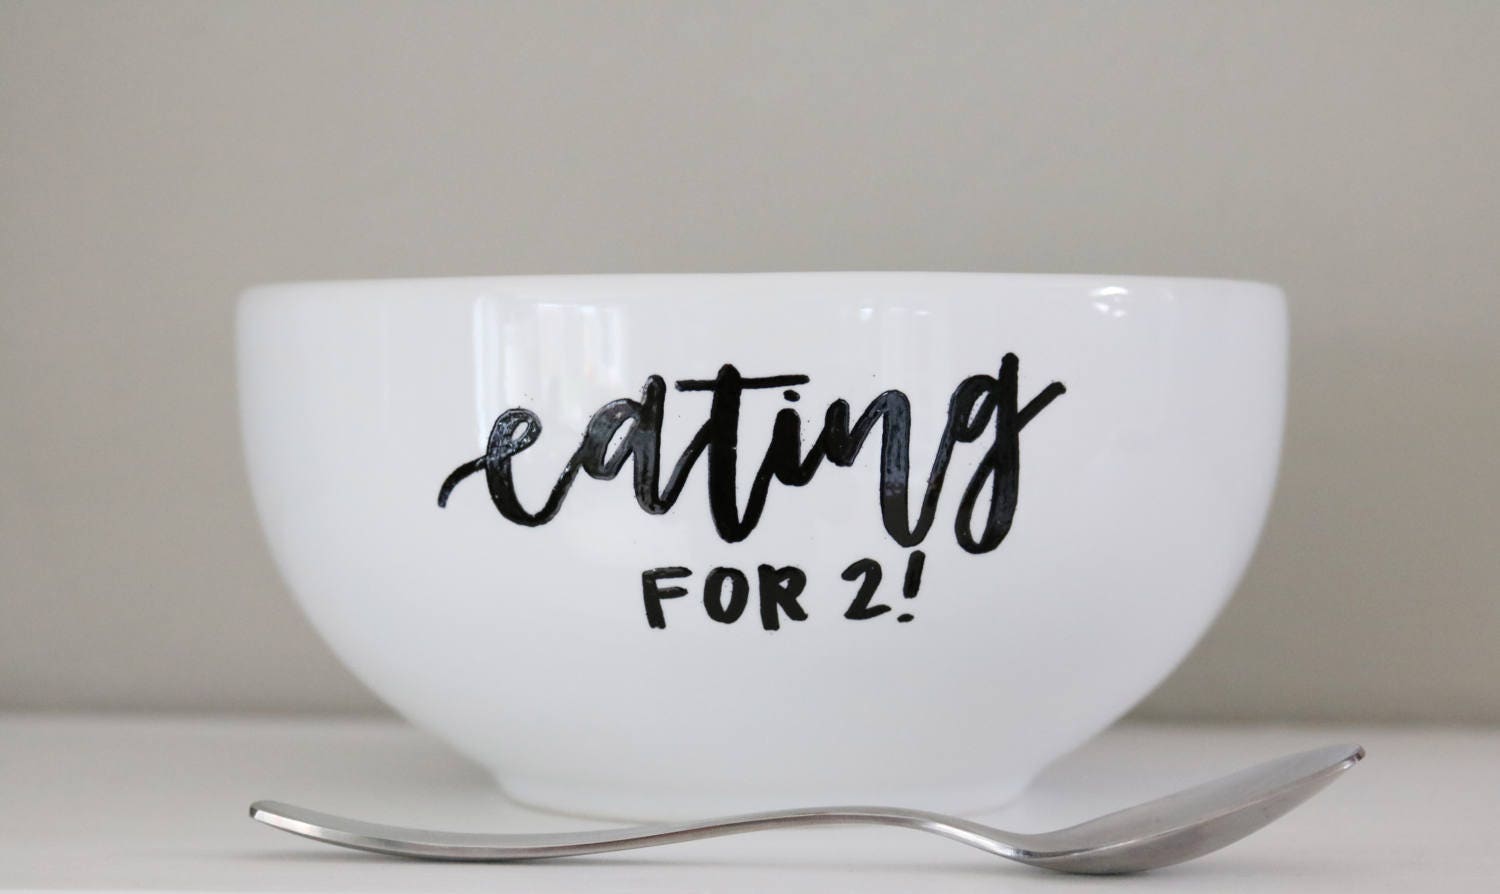 eating for two: pregnancy announcement bowl